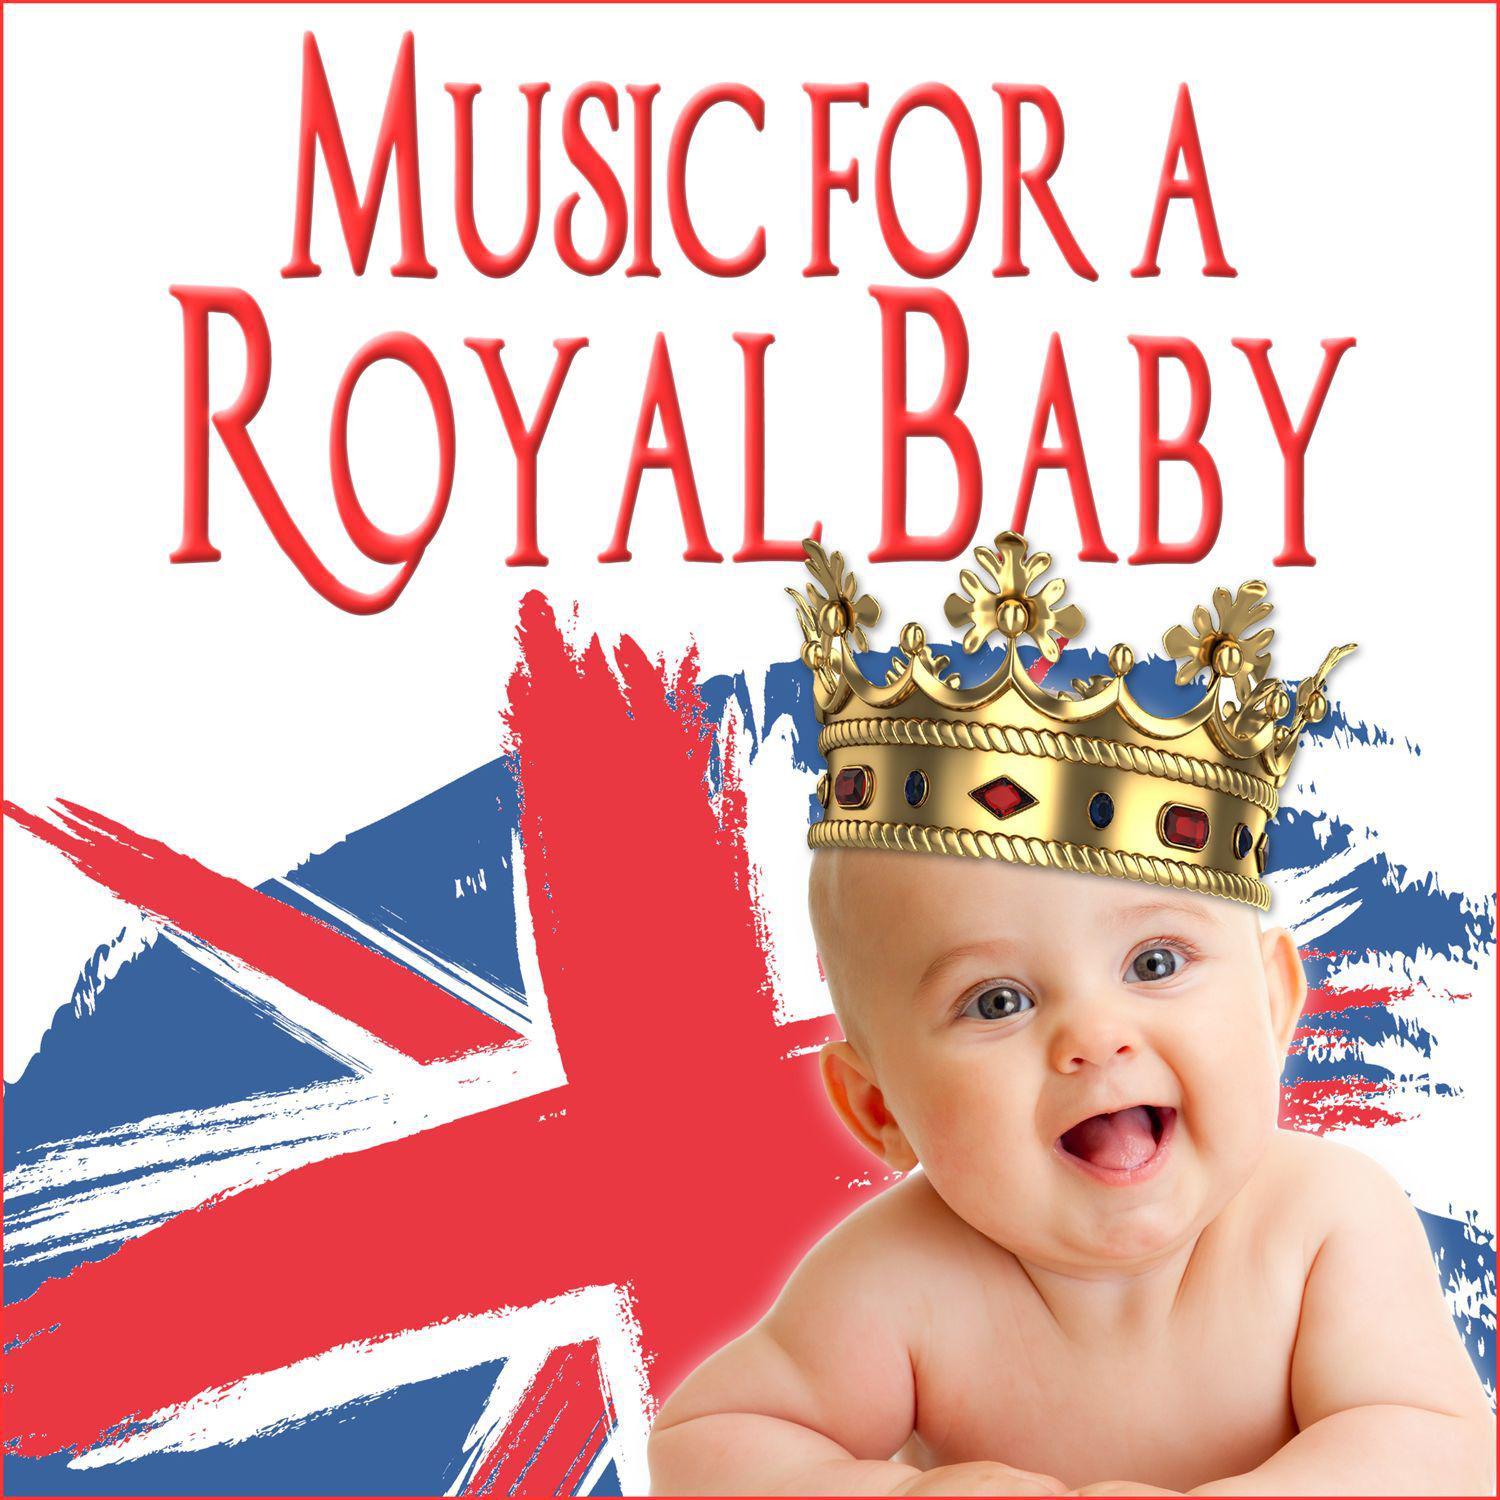 Music for a Royal Baby